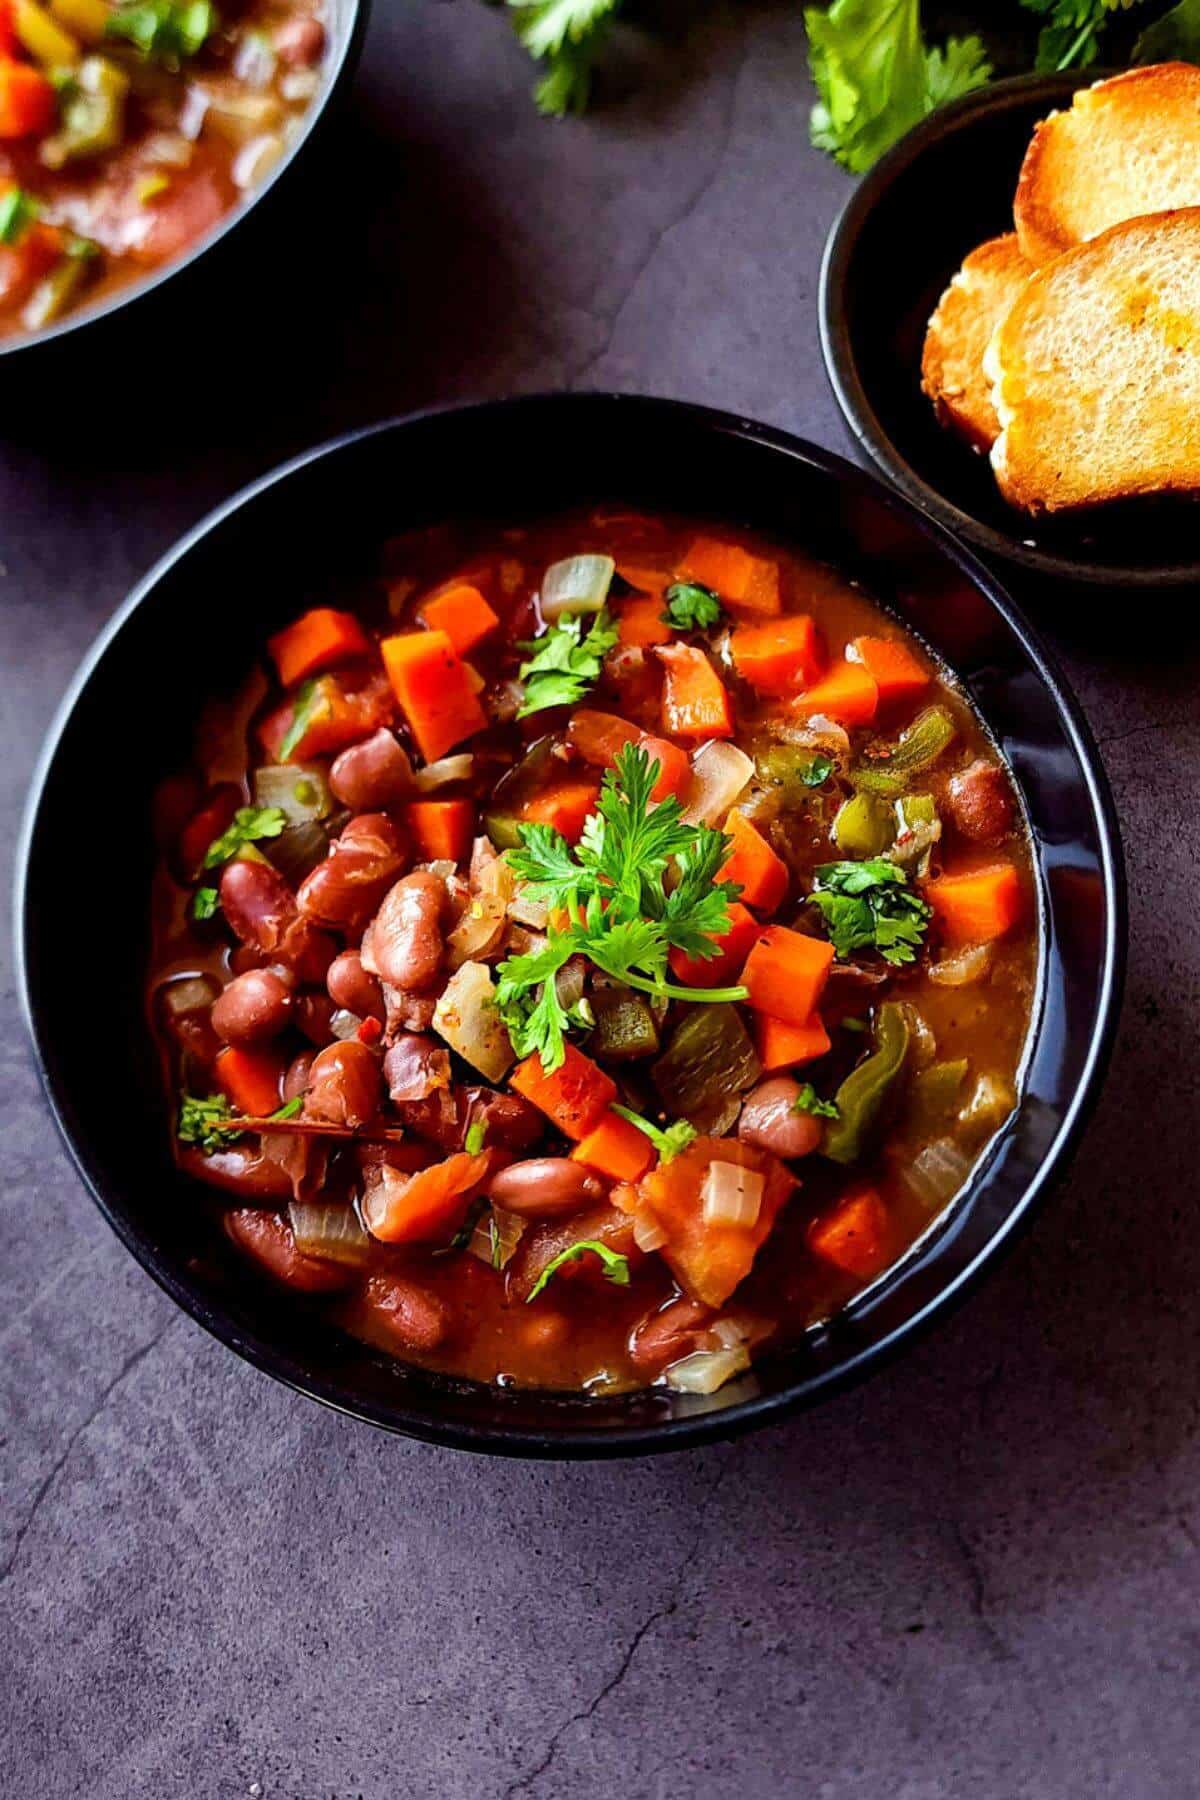 A bowl of kidney bean stew with toasted bread on the side.